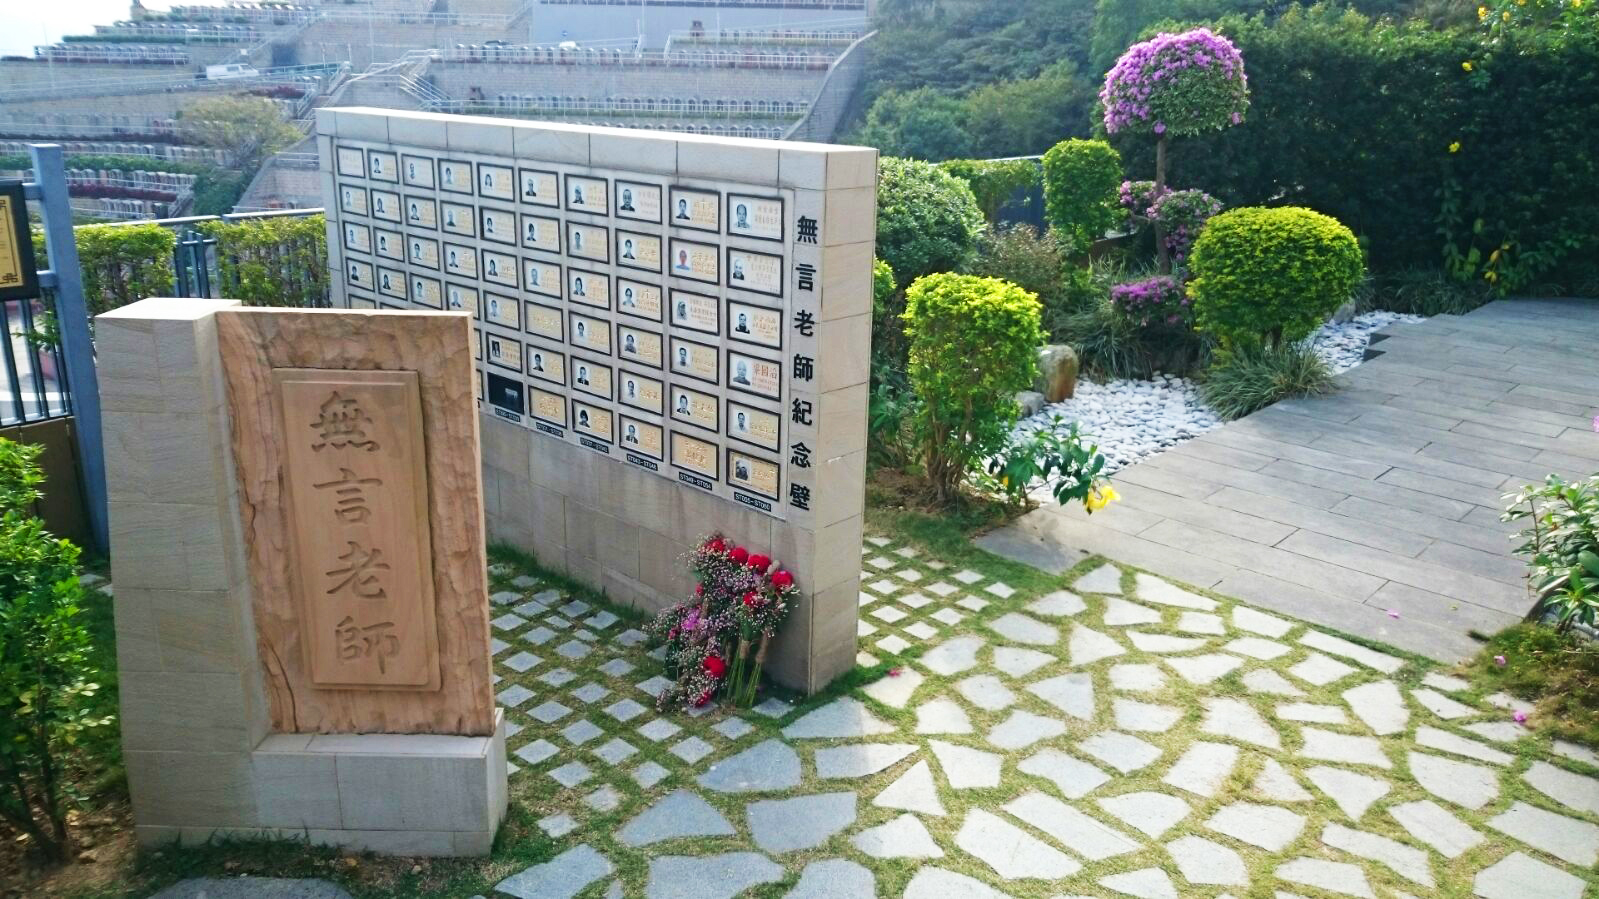 A dedicated memorial wall established at the Garden of Remembrance